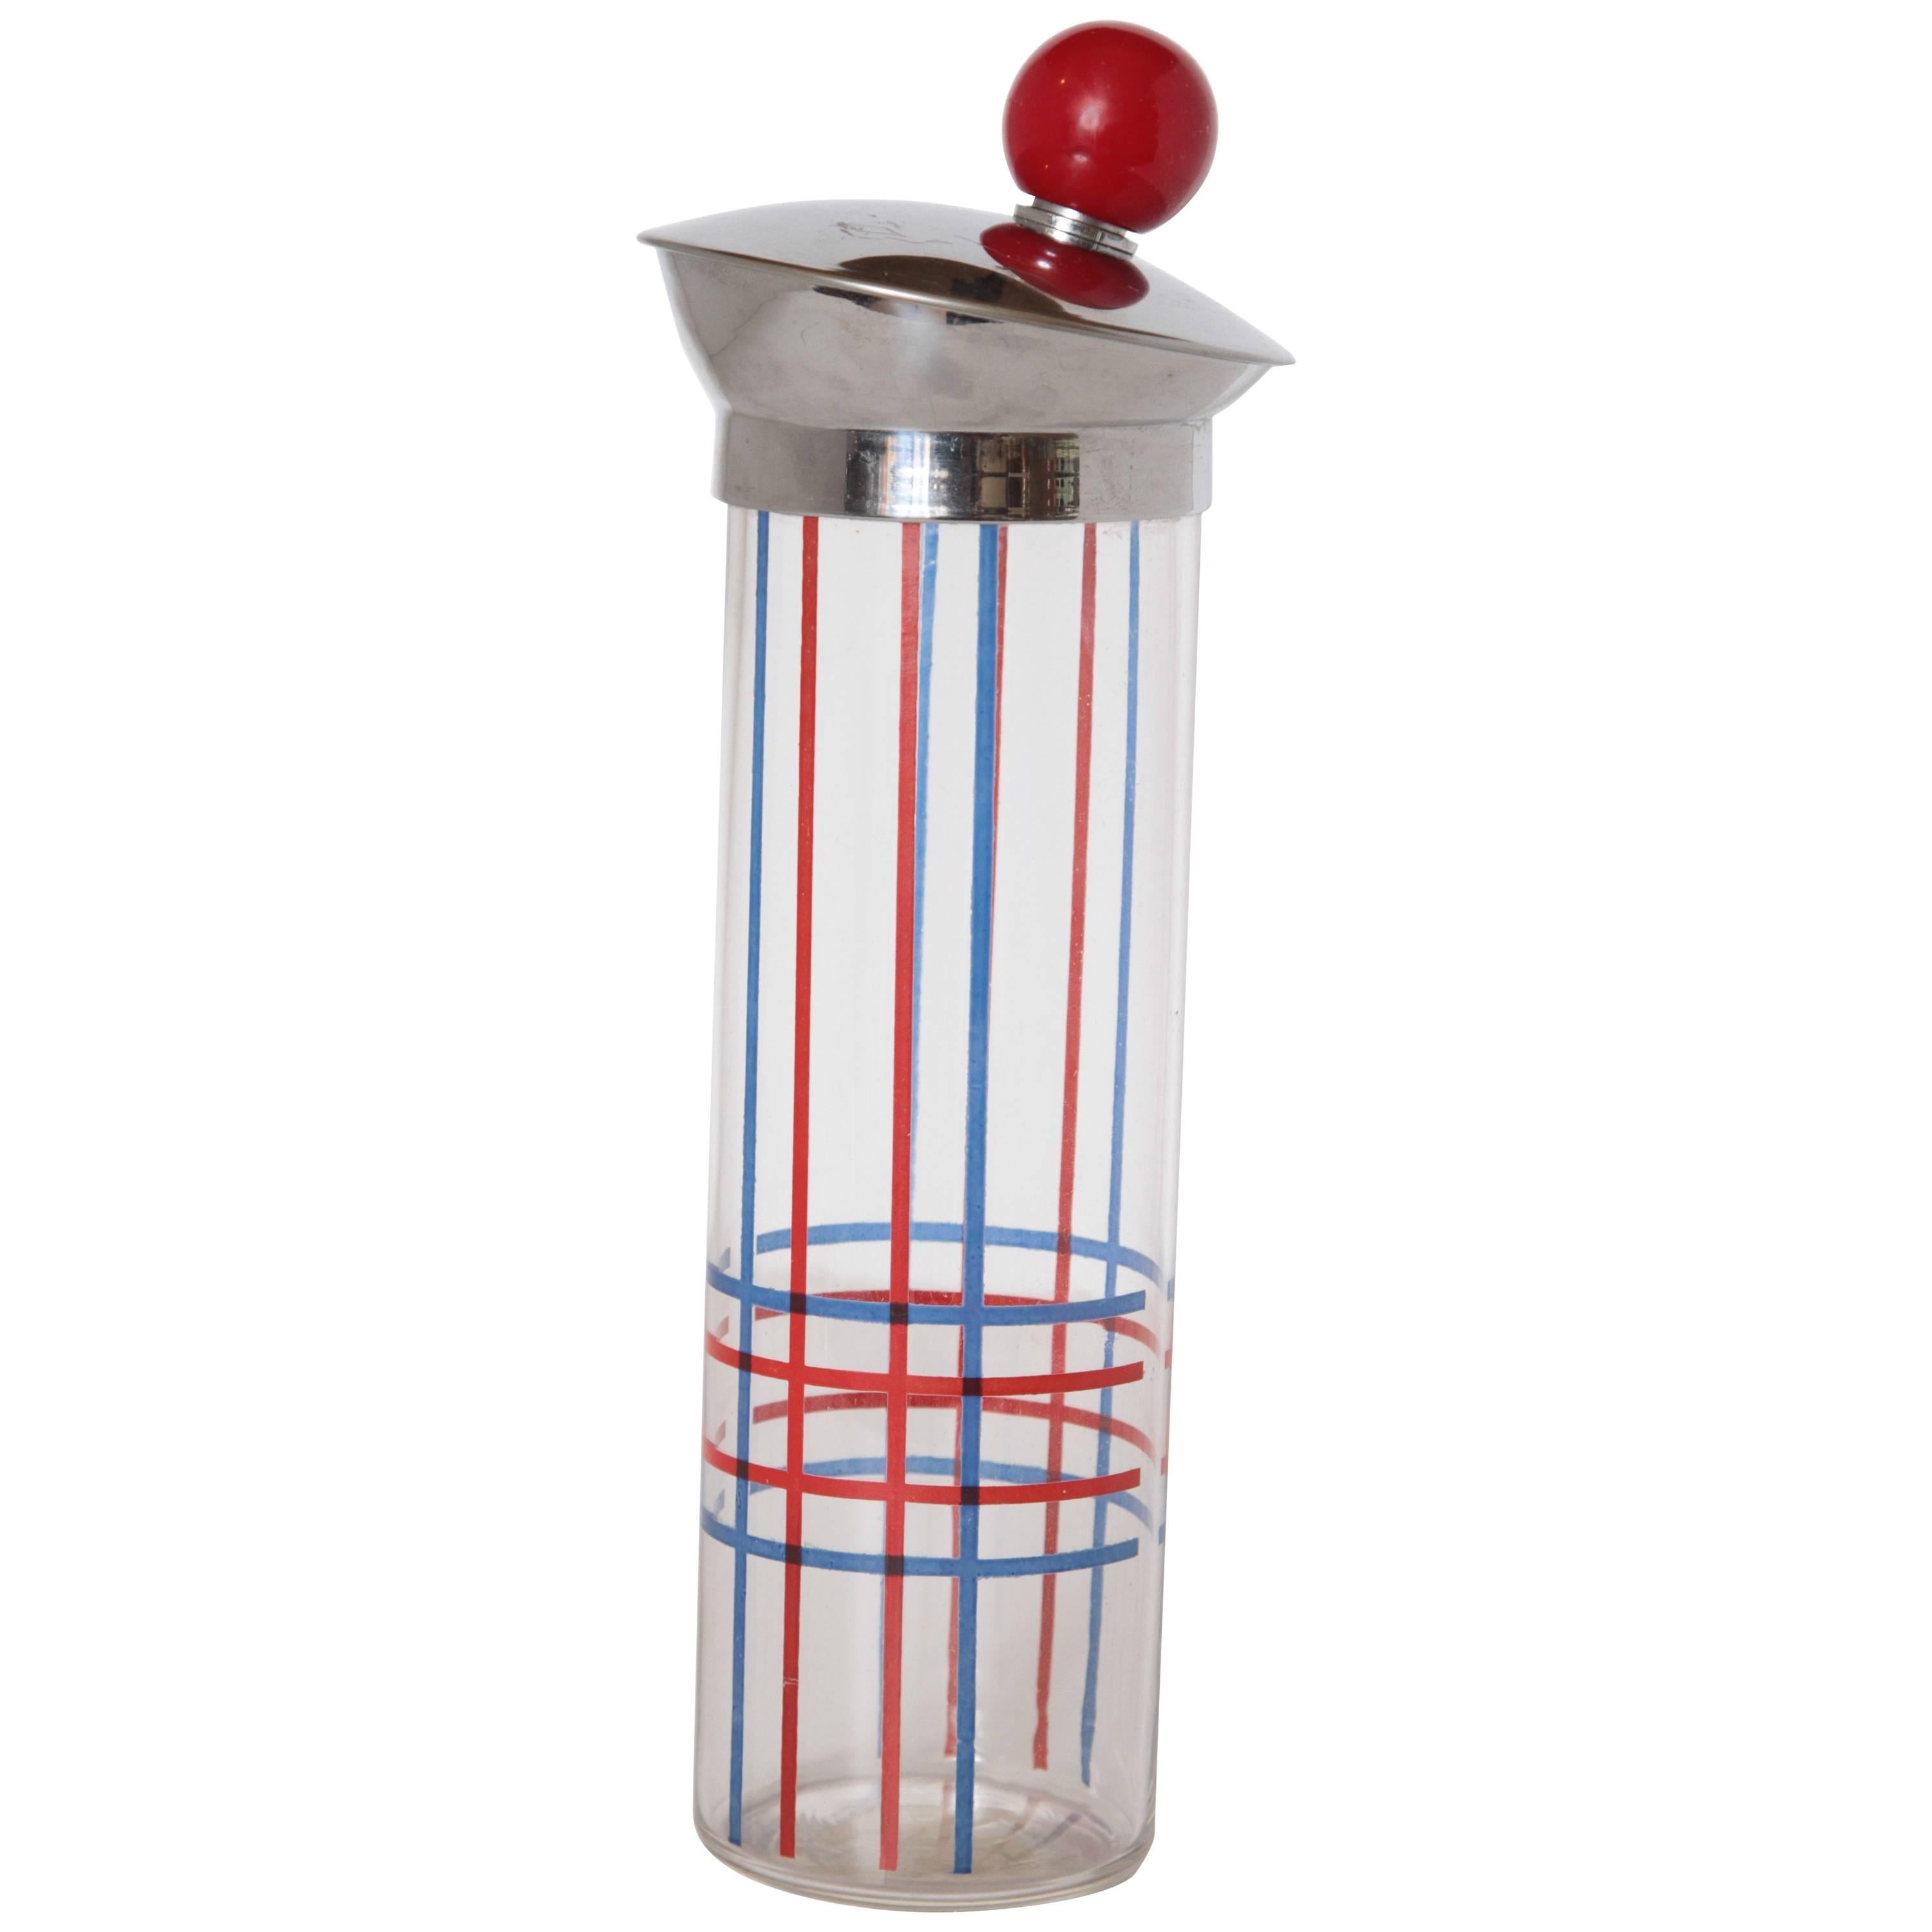 Art Deco Cocktail Shaker, Patented Design, Tam-O-Shaker by Seymour Products